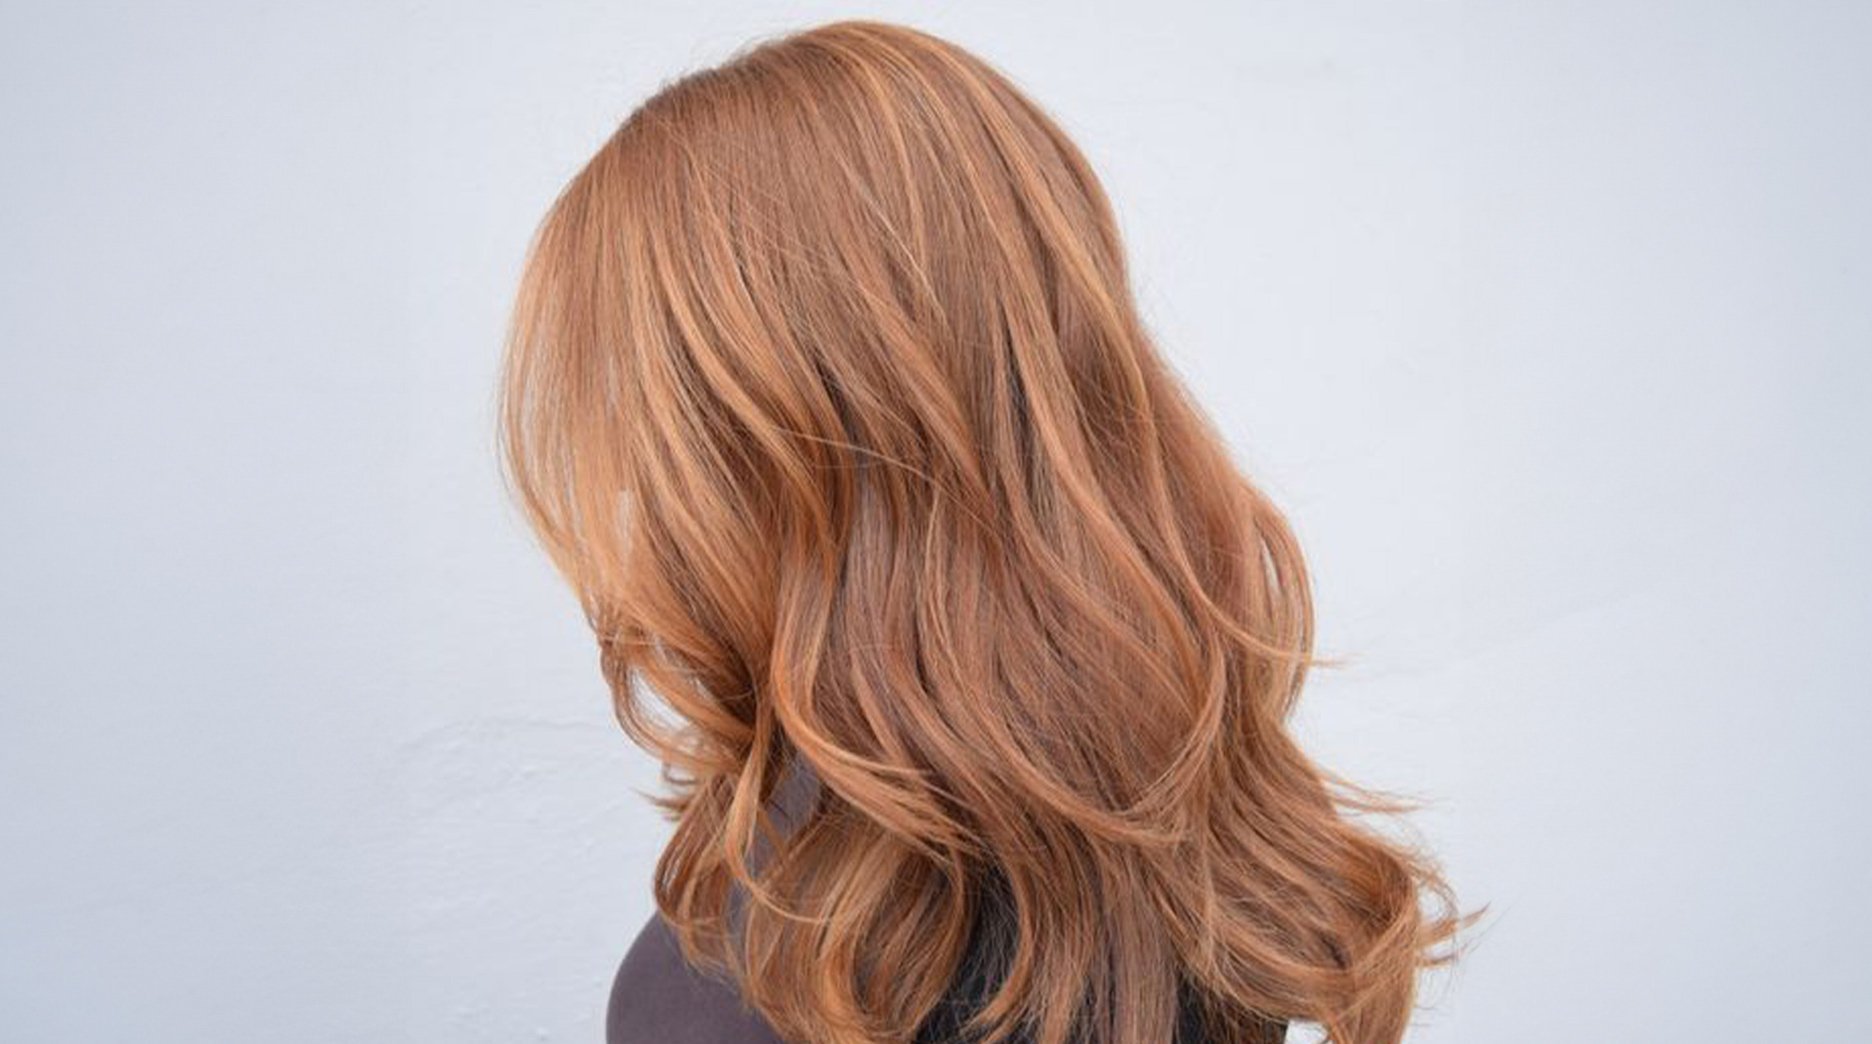 How to Dip Dye Hair at Home - The Skincare Edit